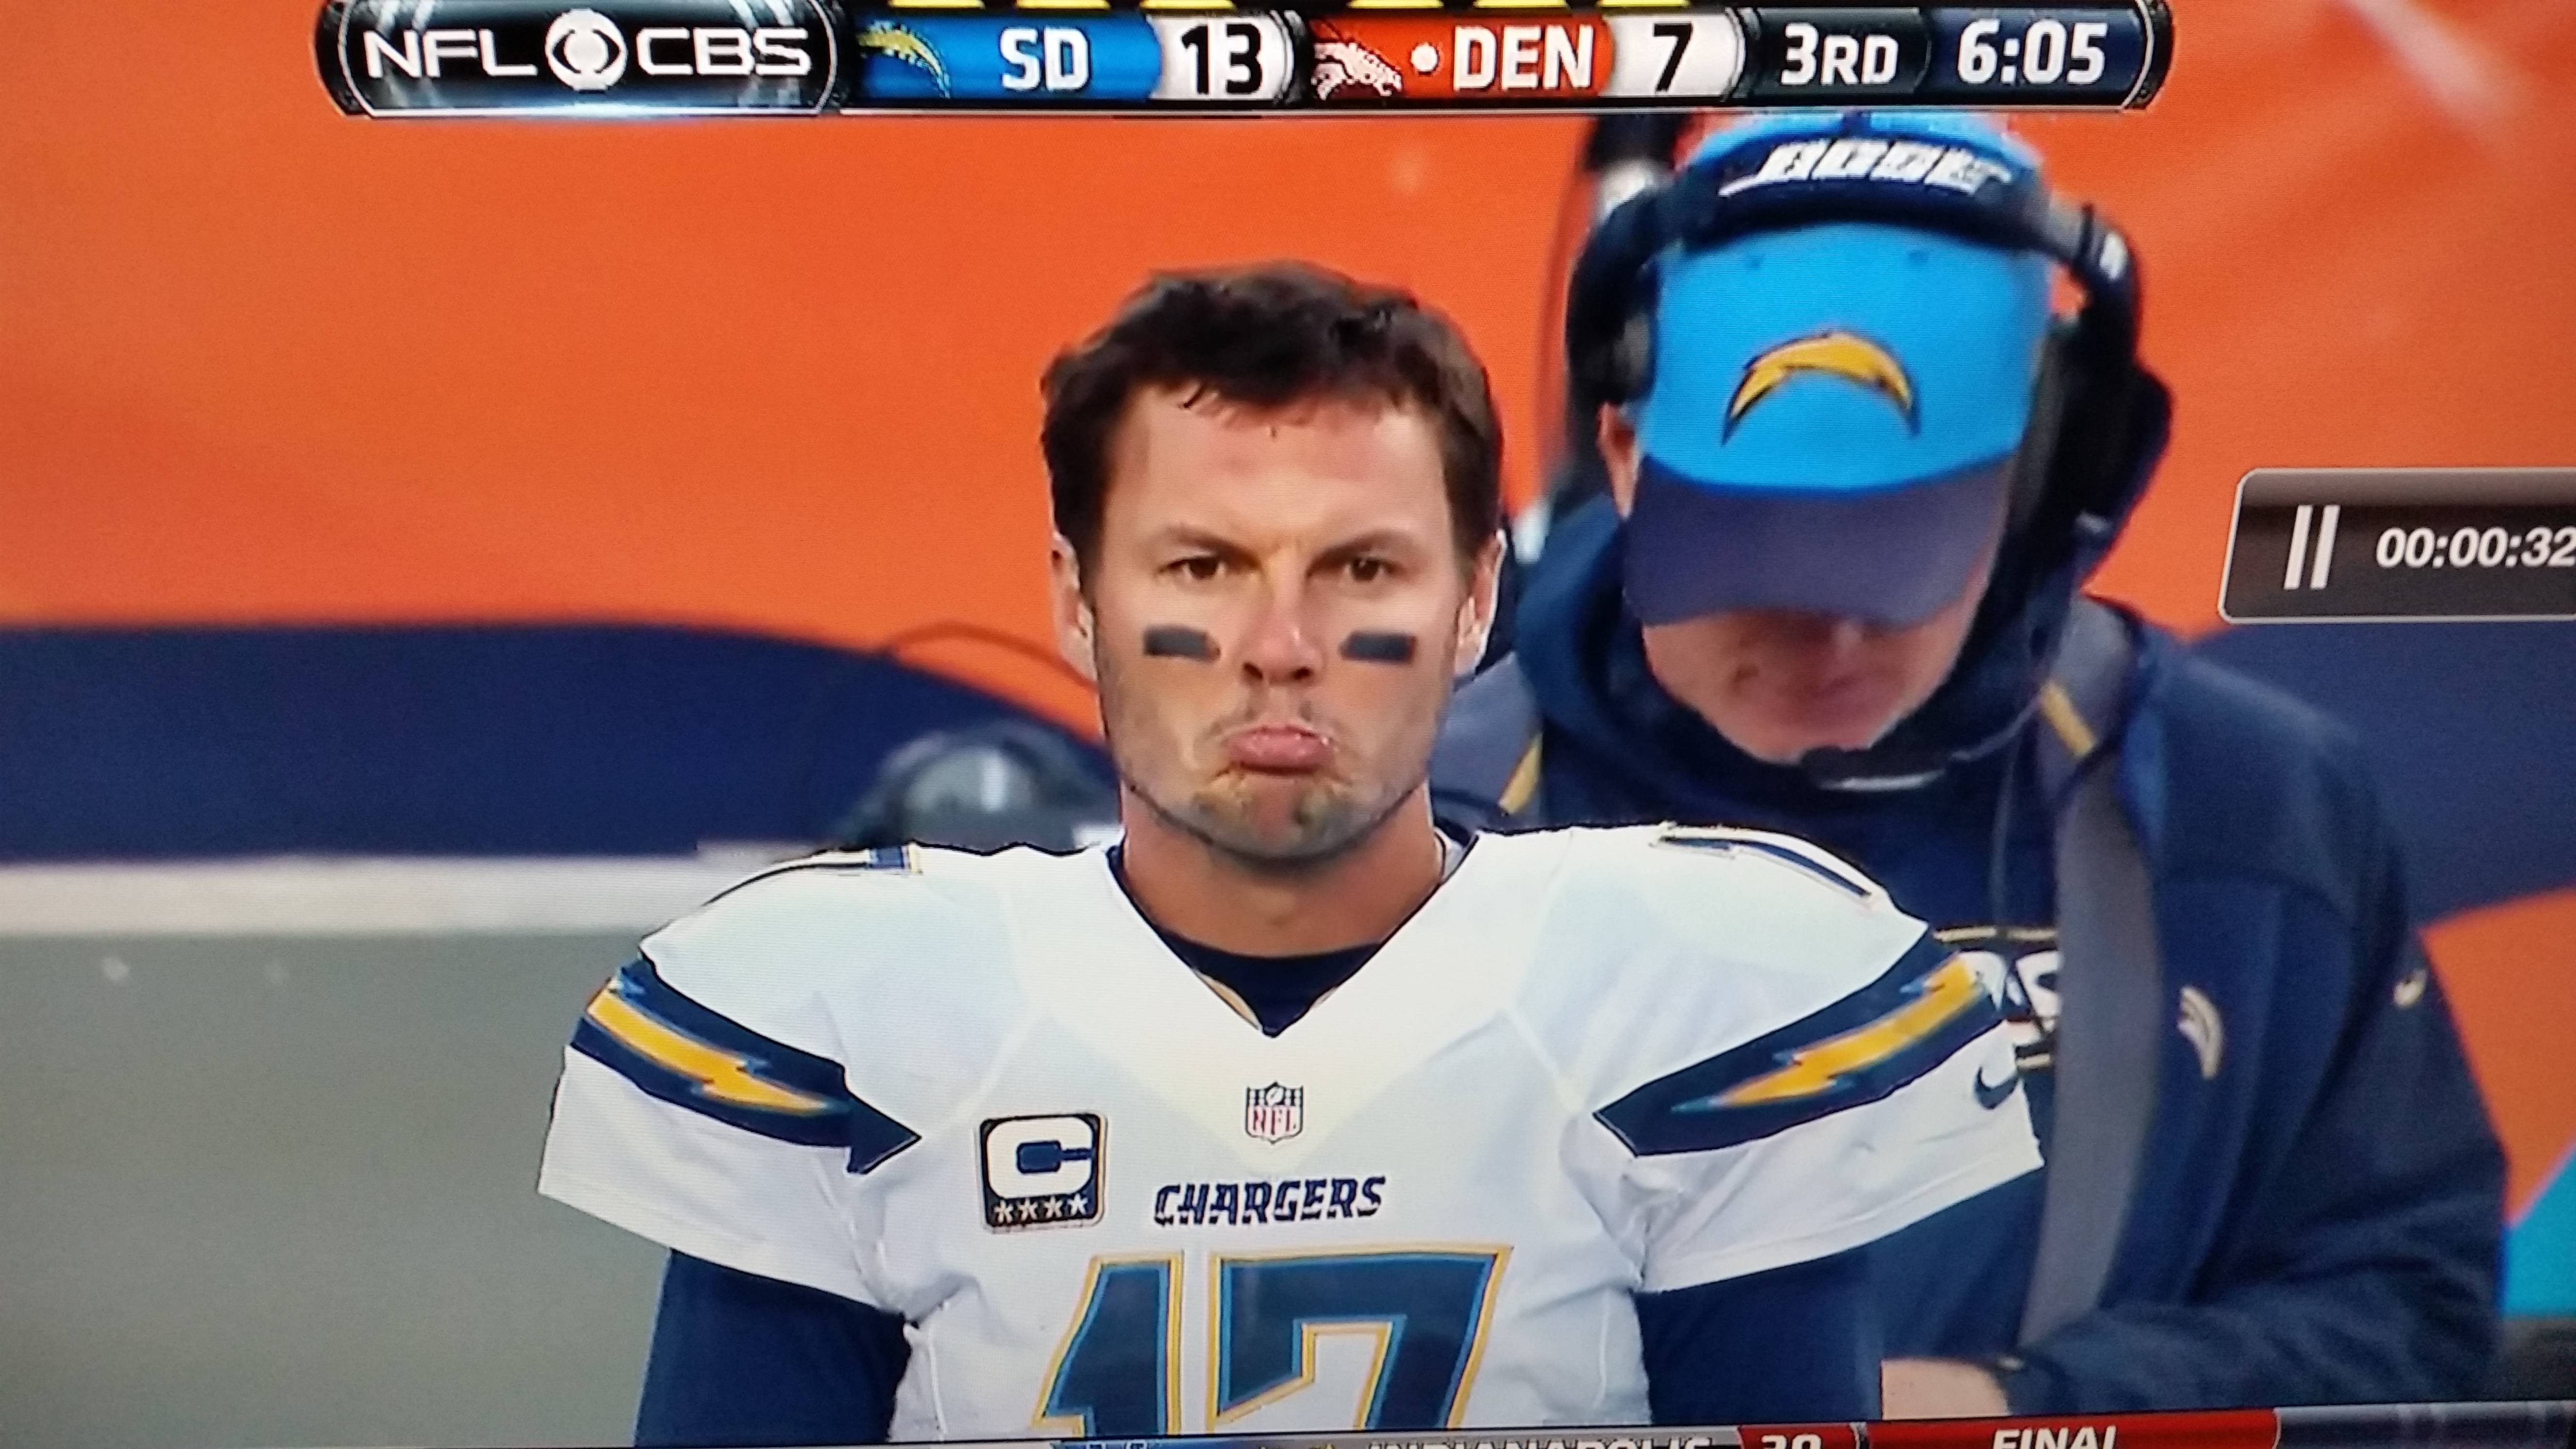 Rivers, Chargers